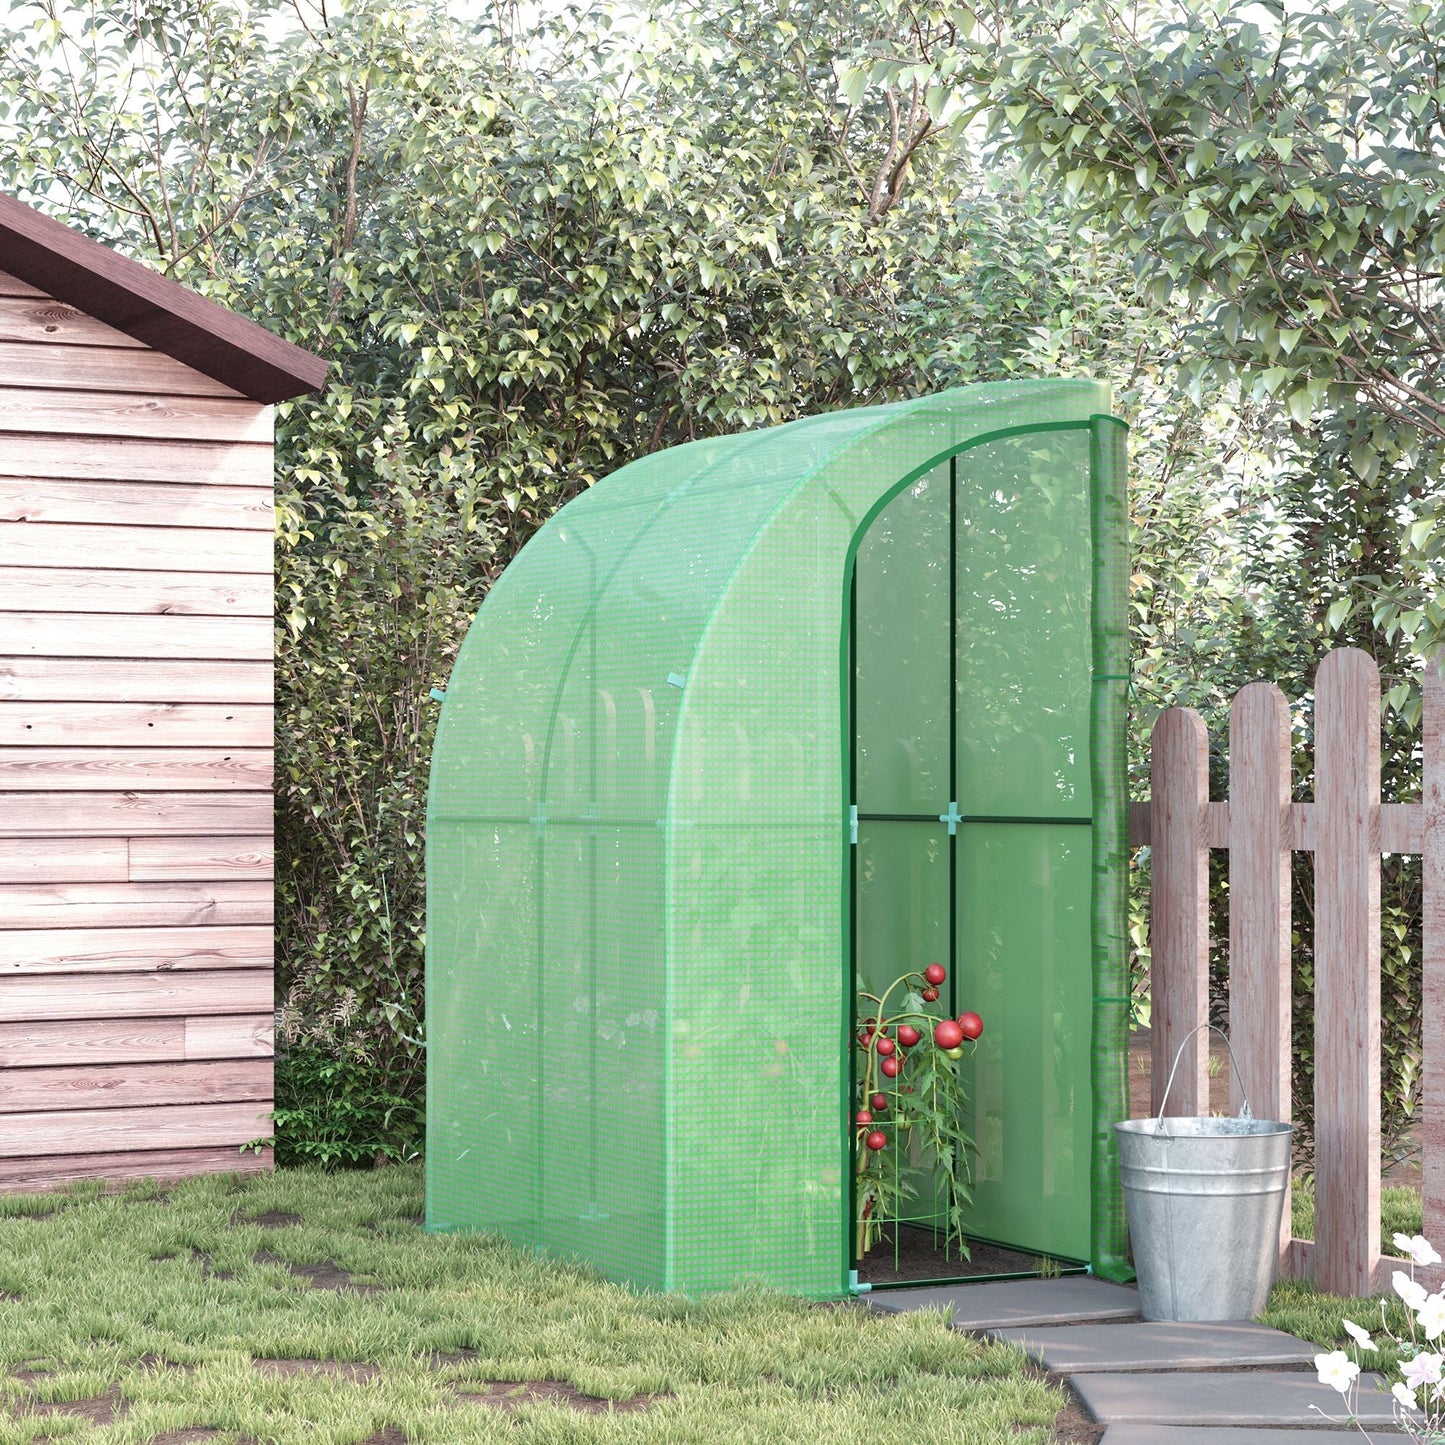 5' x 4' x 7' Outdoor Walk-in Garden Greenhouse, Polycarbonate Panels Plants Flower Growth Shed with Roll-Up Door Hot House, for Plants Herbs Vegetables - Green at Gallery Canada